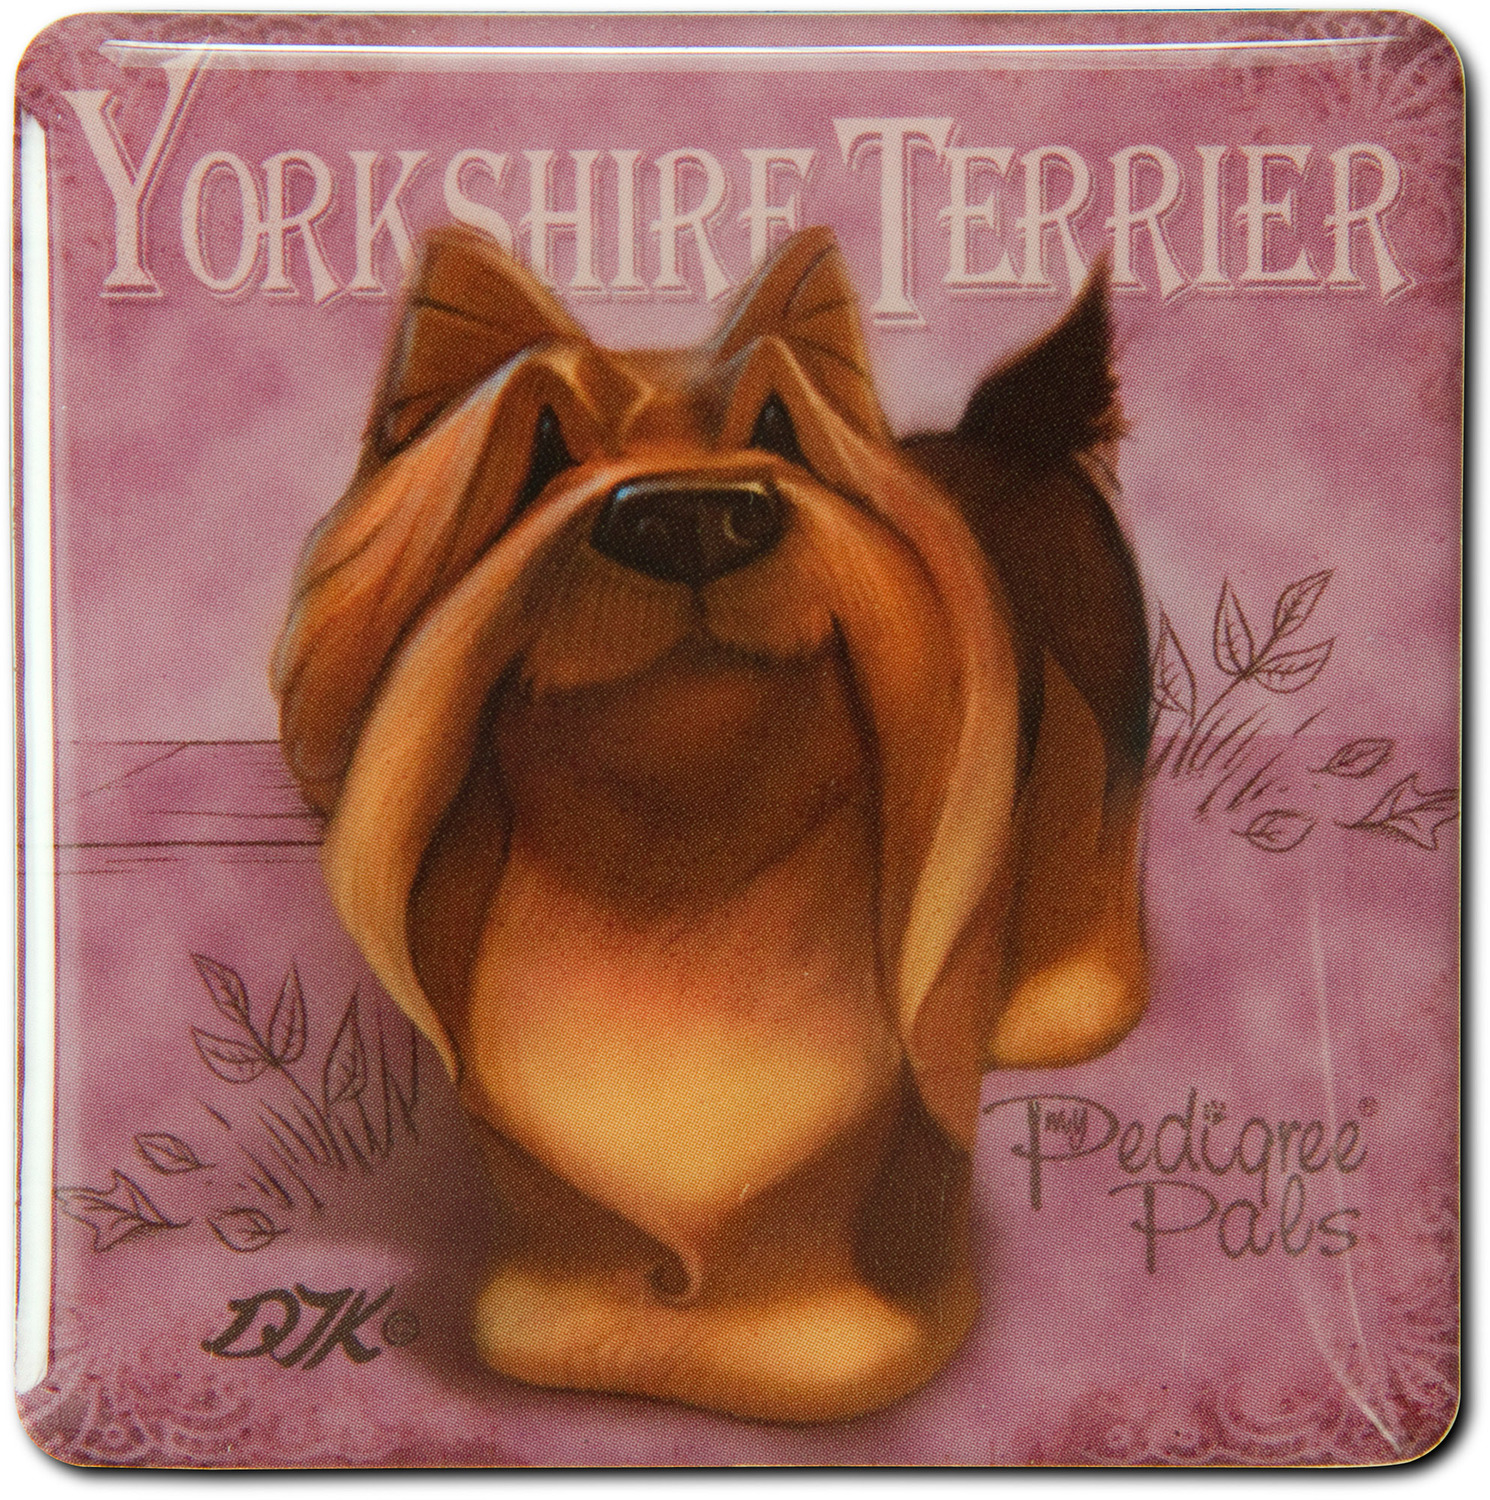 Yorkie by My Pedigree Pals - Yorkie - 2.5" Square Magnet with Easel Back